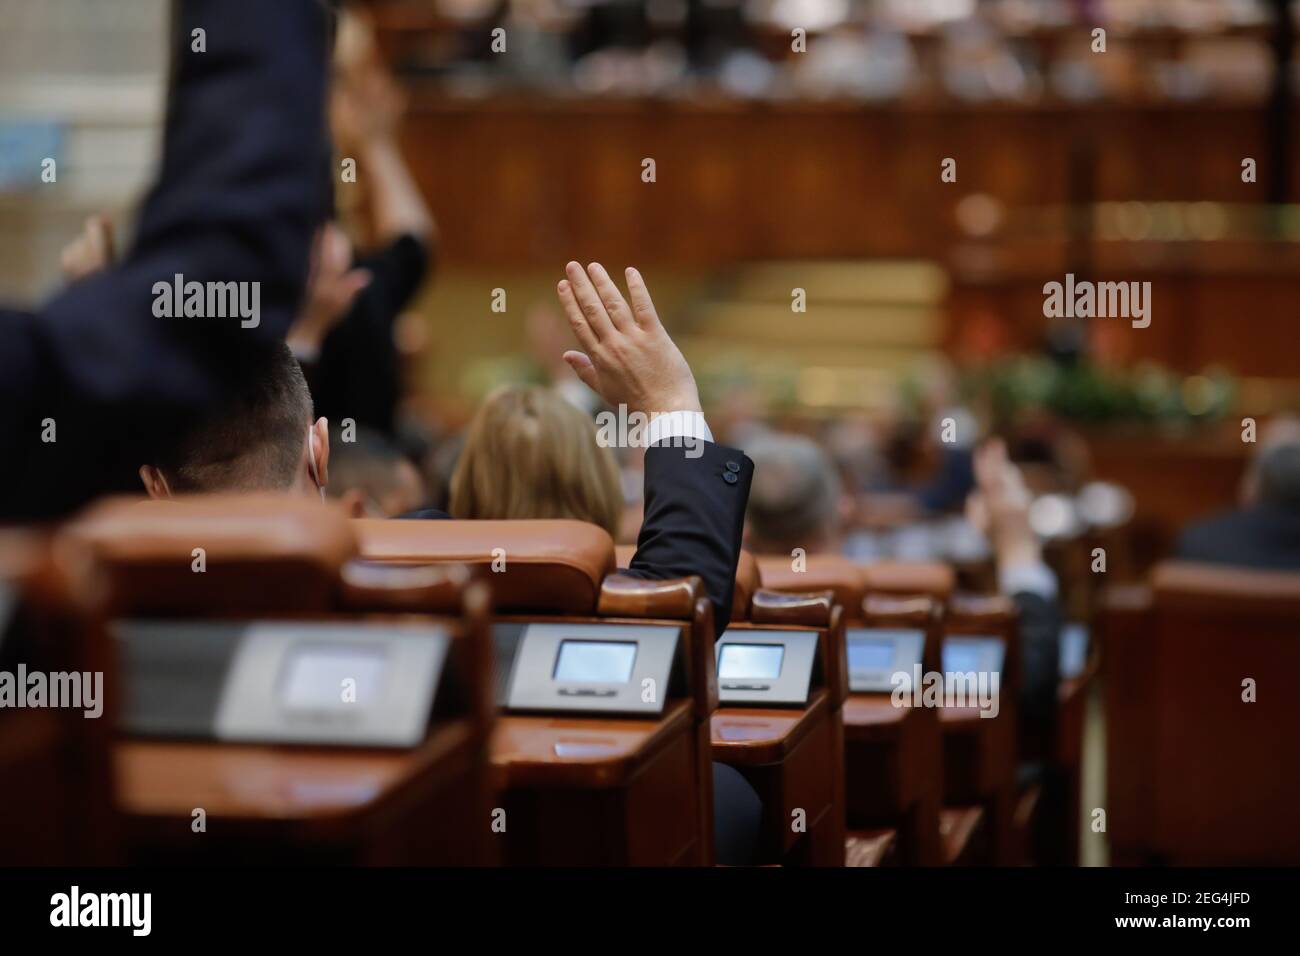 Bucharest, Romania - February 17, 2021: Shallow depth of field (selective focus) with details of Romanian MPs voting by raising their hands. Stock Photo